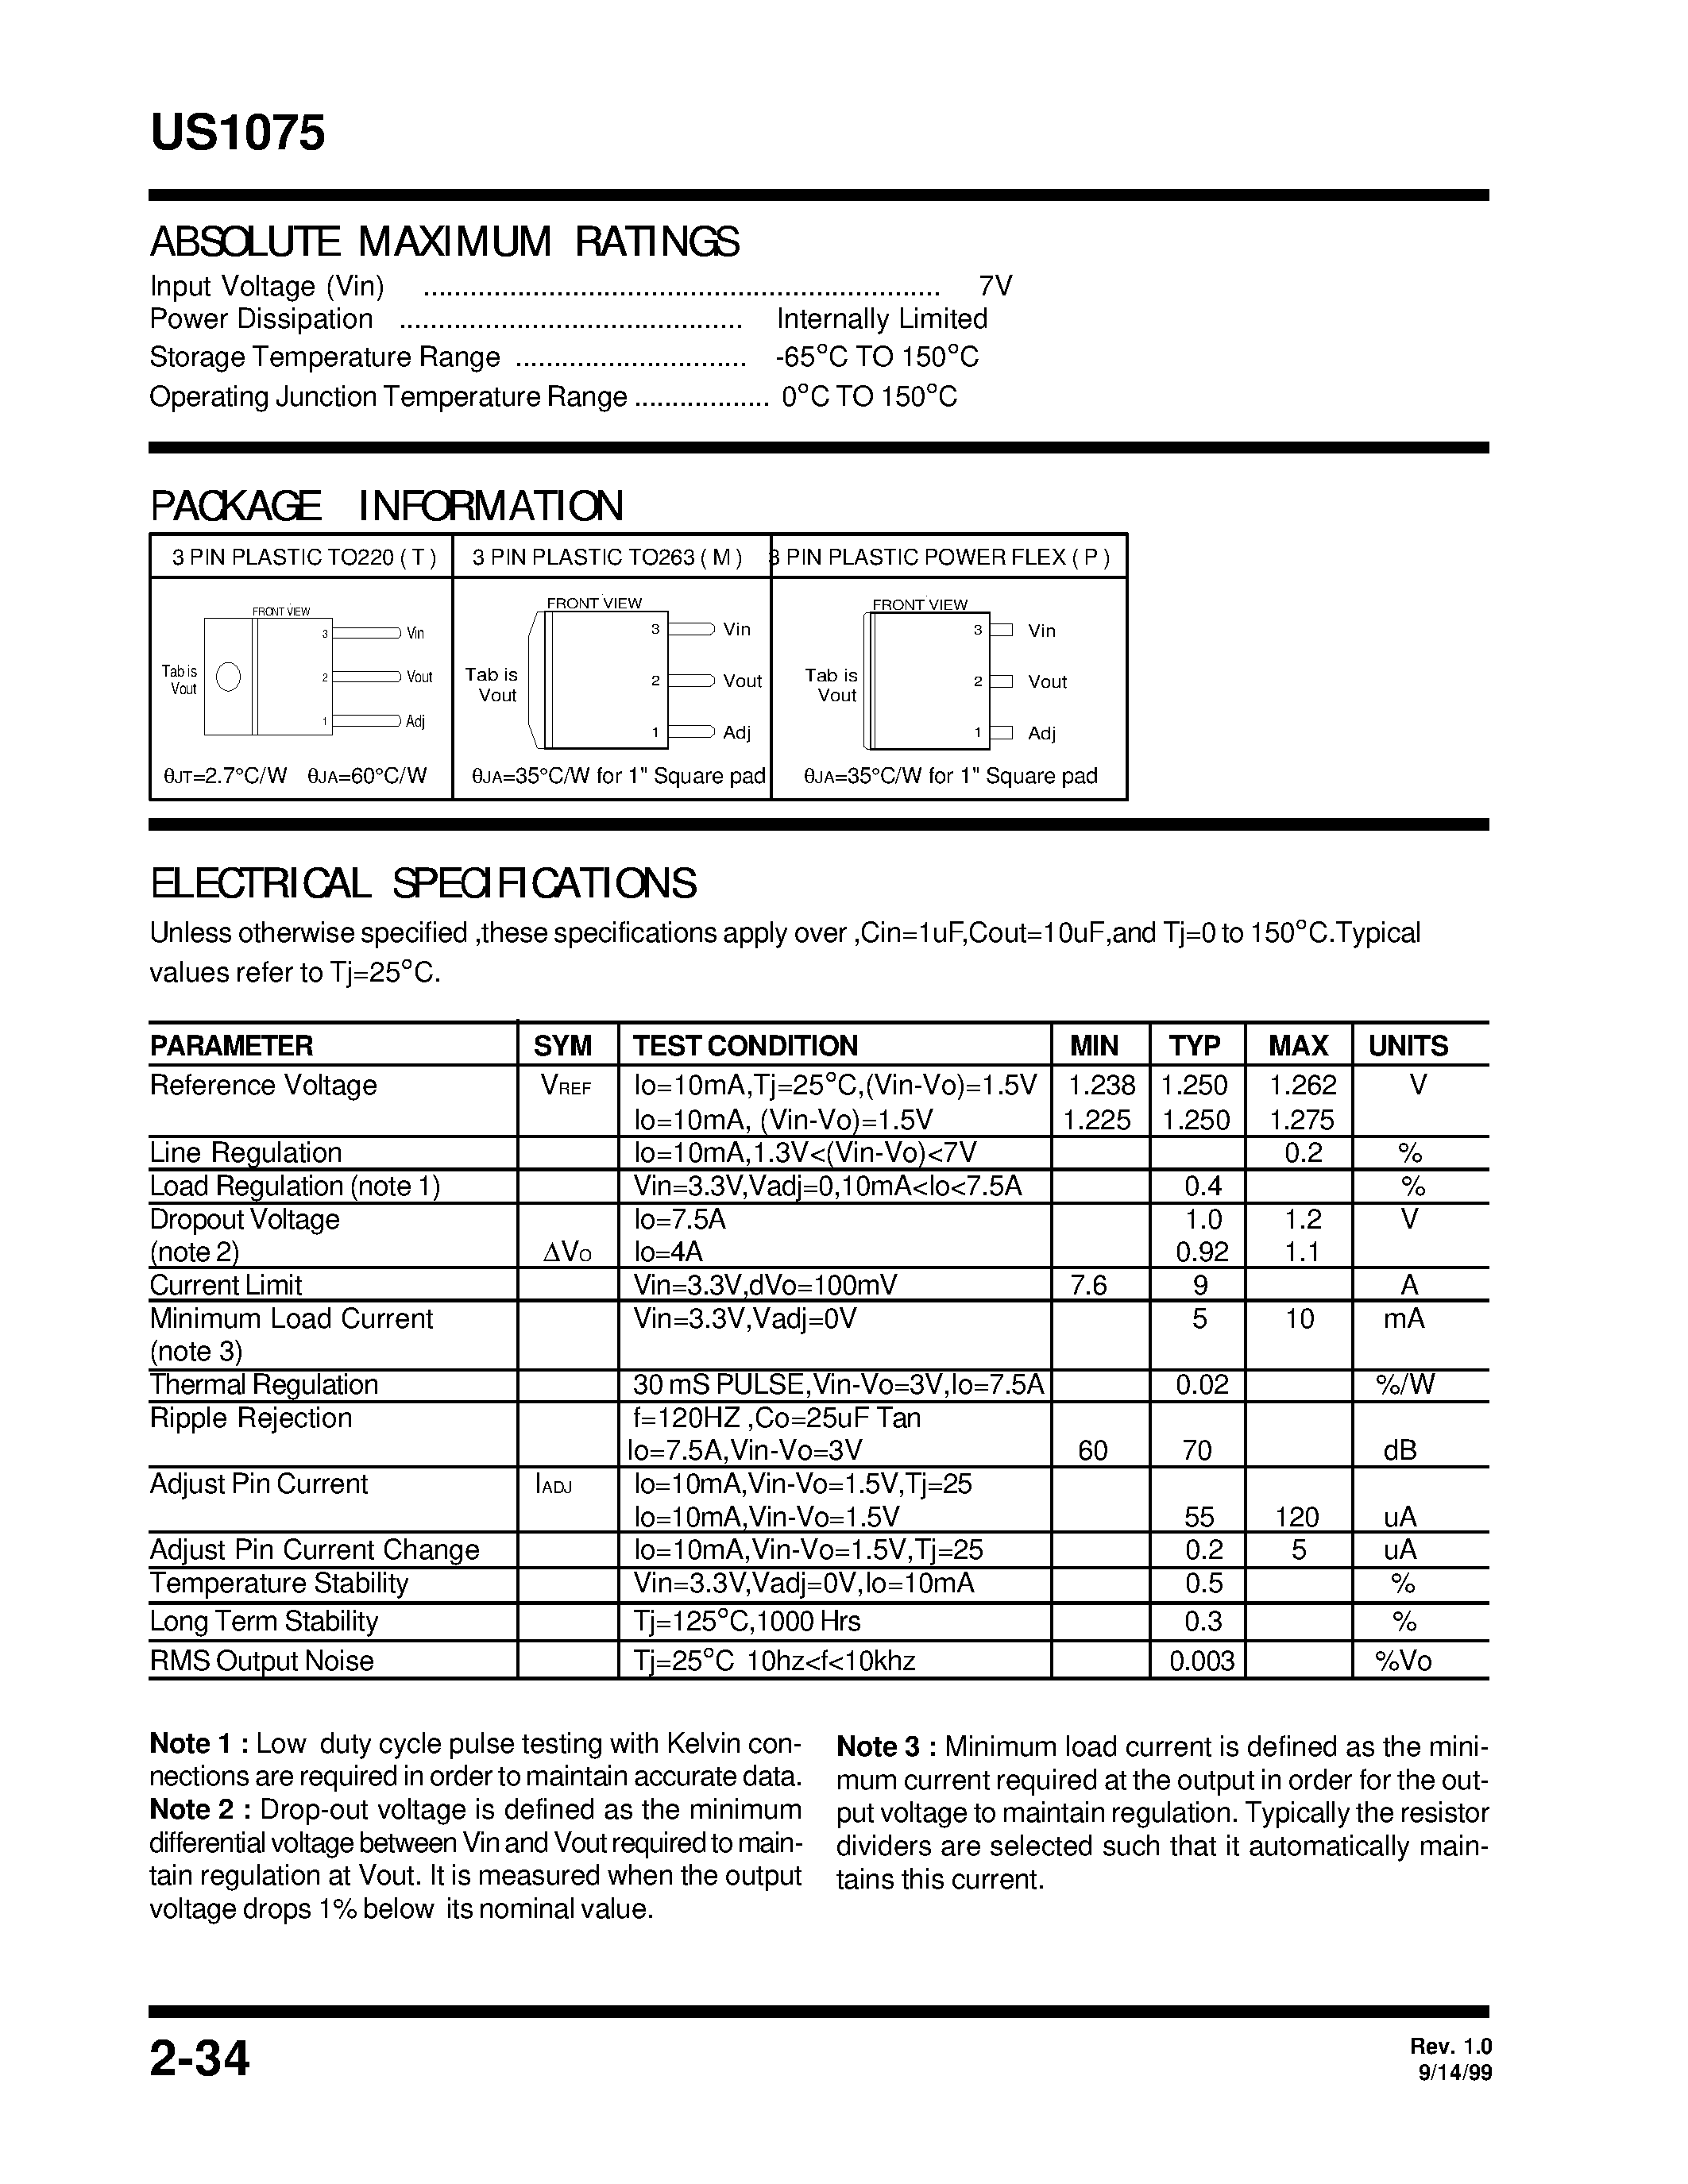 Datasheet US1075CP - 7.5A LOW DROPOUT POSITIVE ADJUSTABLE REGULATOR page 2